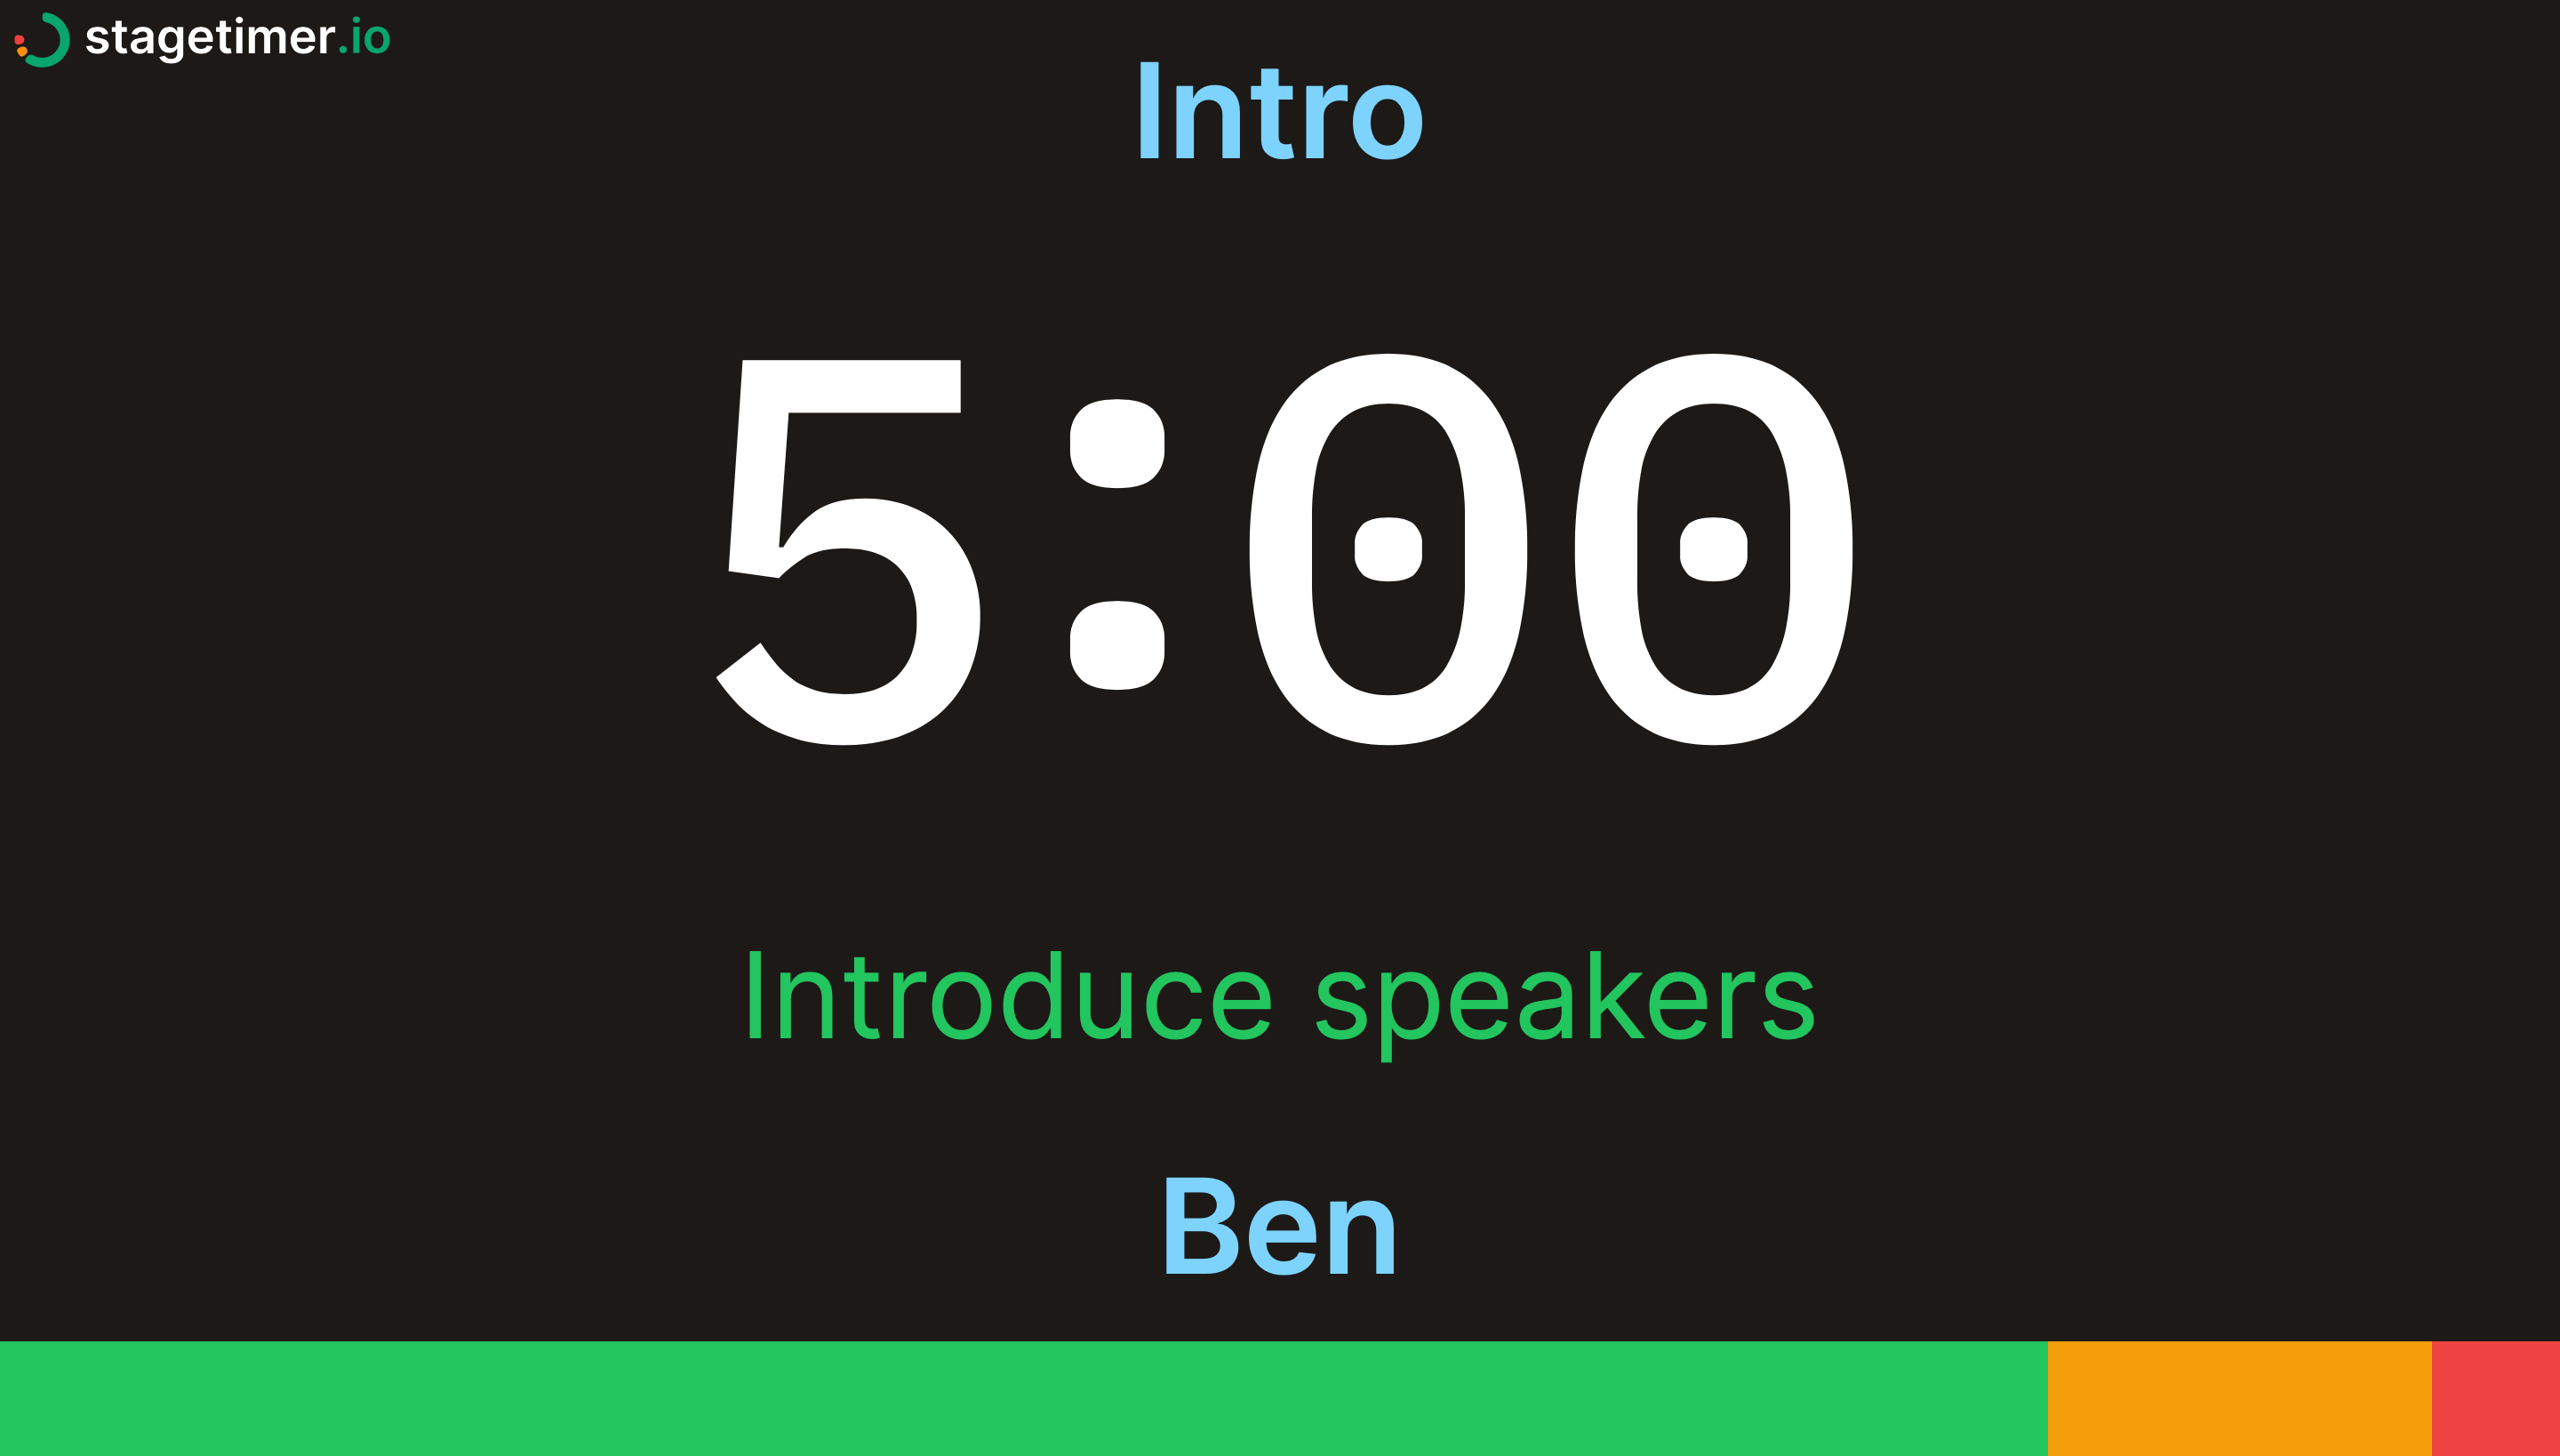 Viewer page displaying timer, title, and speaker